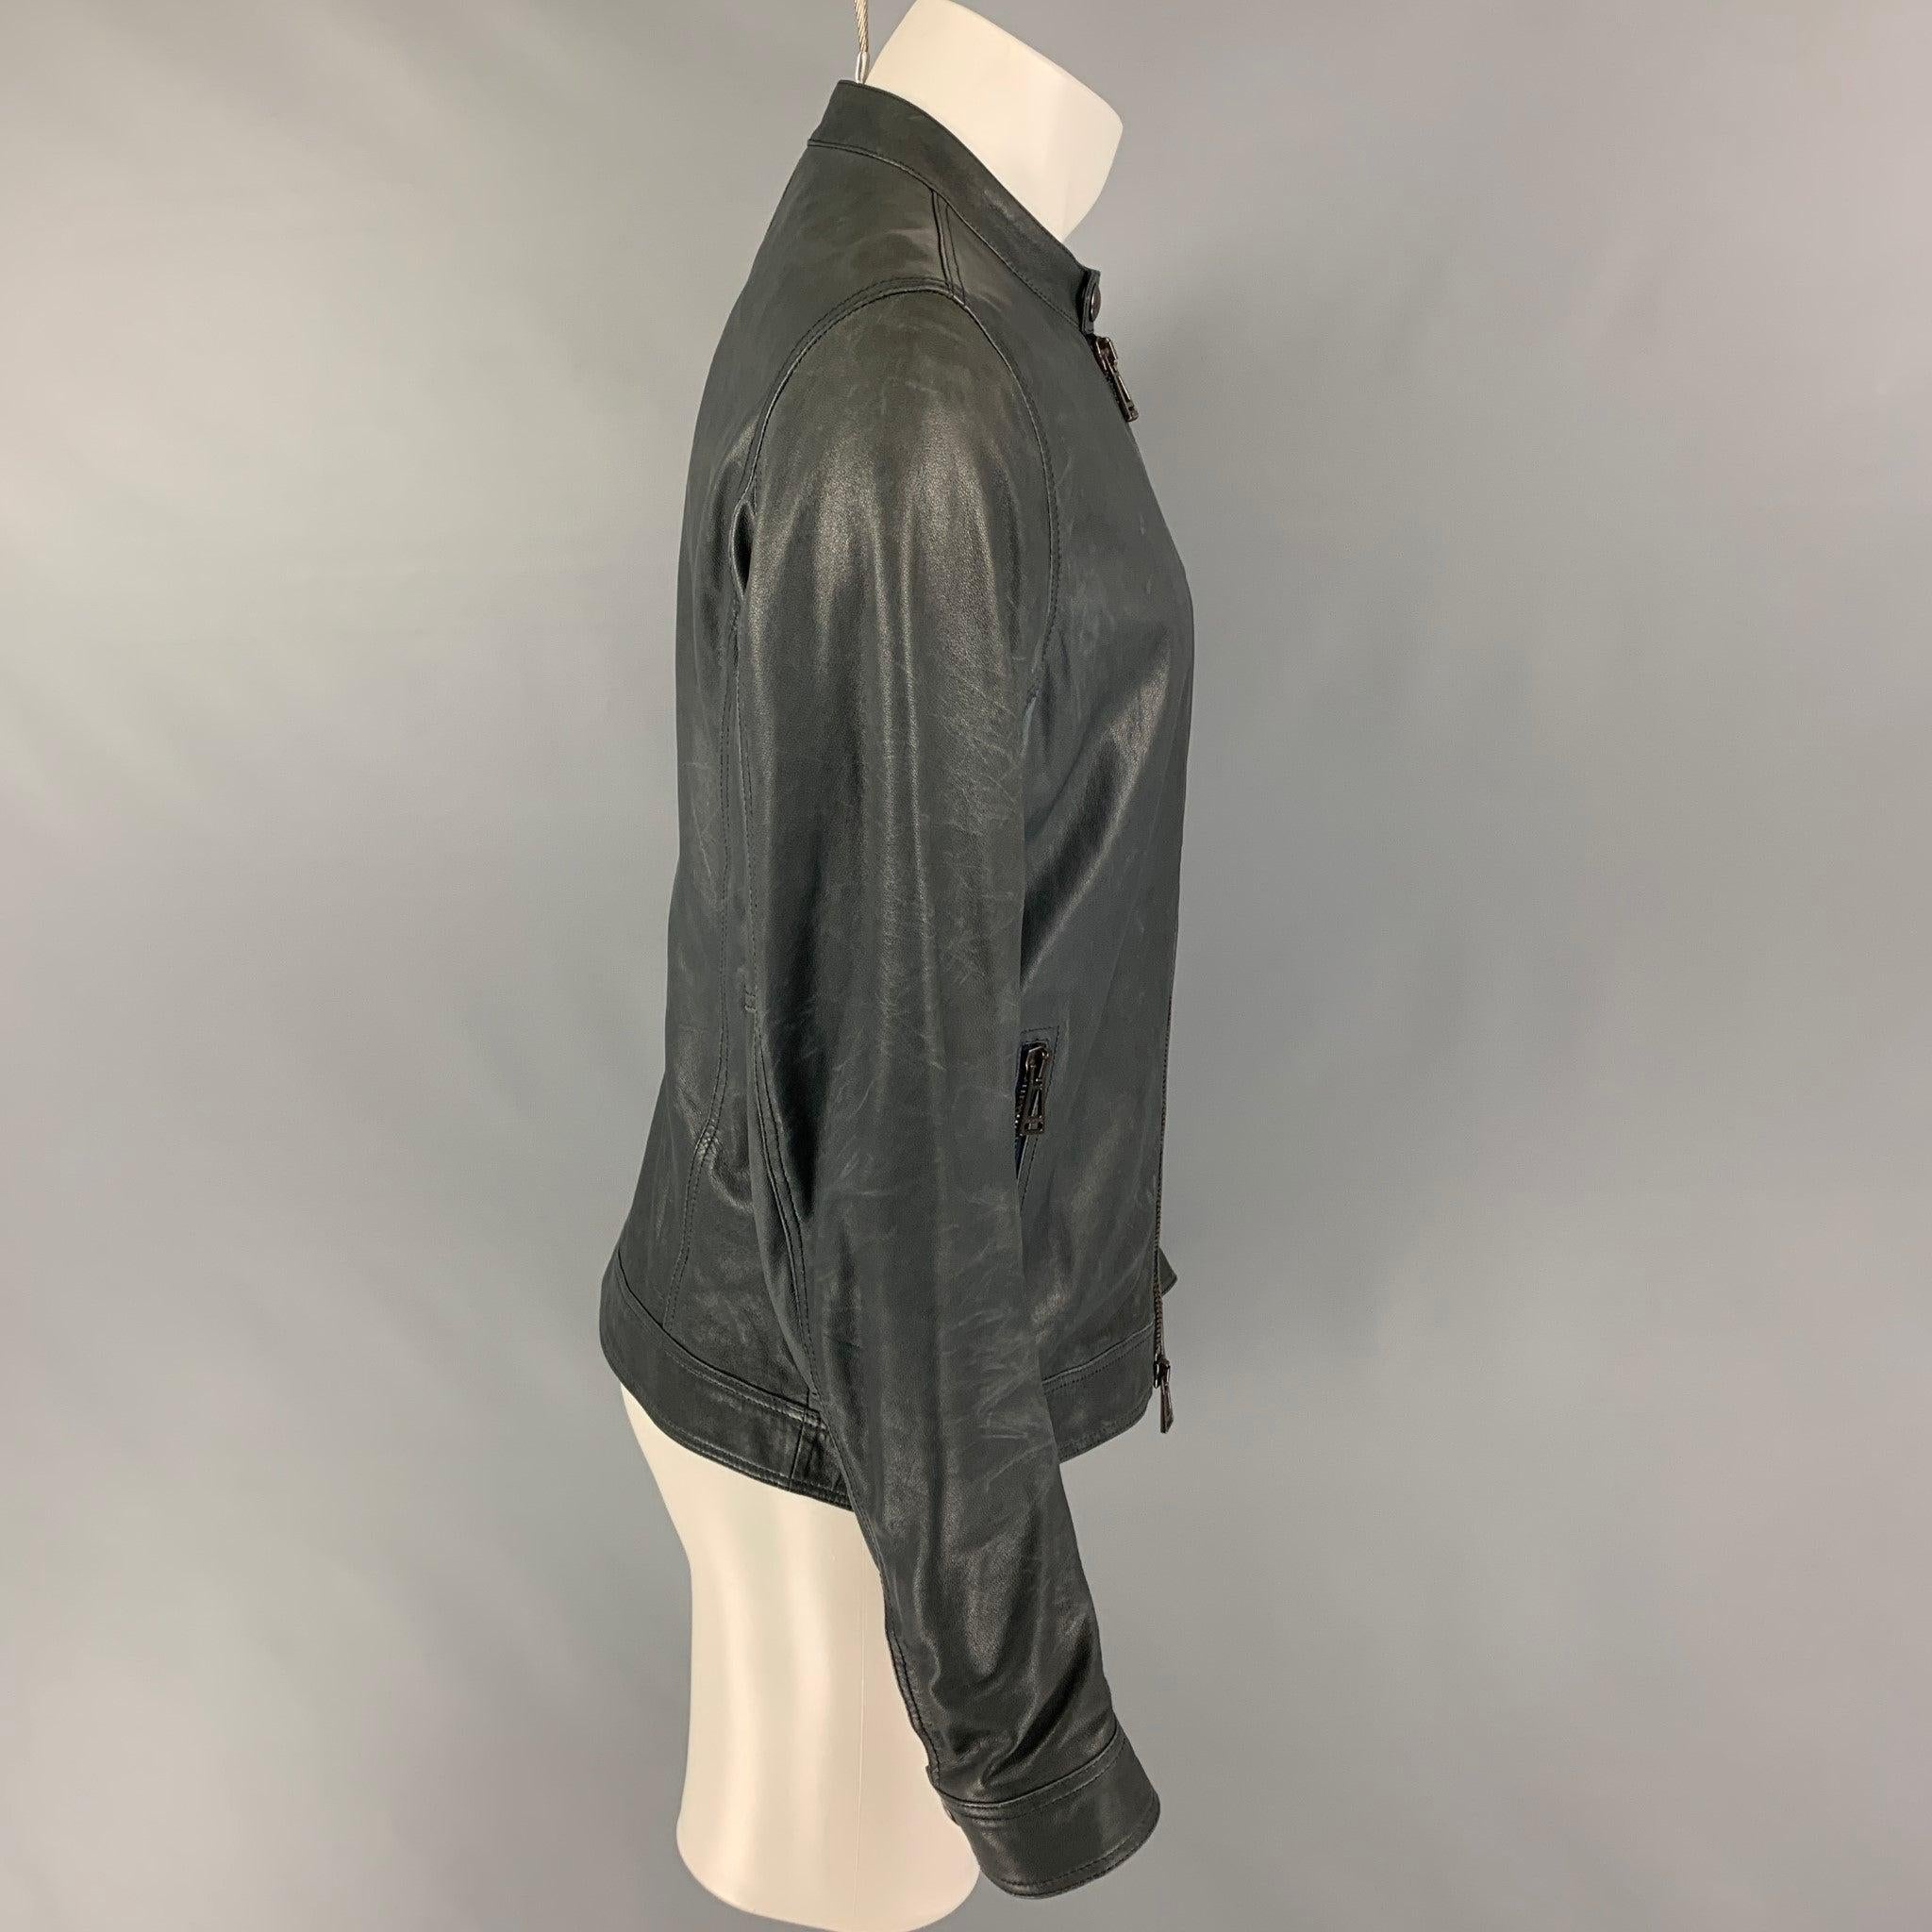 BELSTAFF jacket comes in a gray leather featuring a snap button collar detail, zipper pockets, and a full zip up closure.
 Very Good
 Pre-Owned Condition. 
 

 Marked:  50 
 

 Measurements: 
  
 Shoulder: 17.5 inches Chest: 40 inches Sleeve: 27